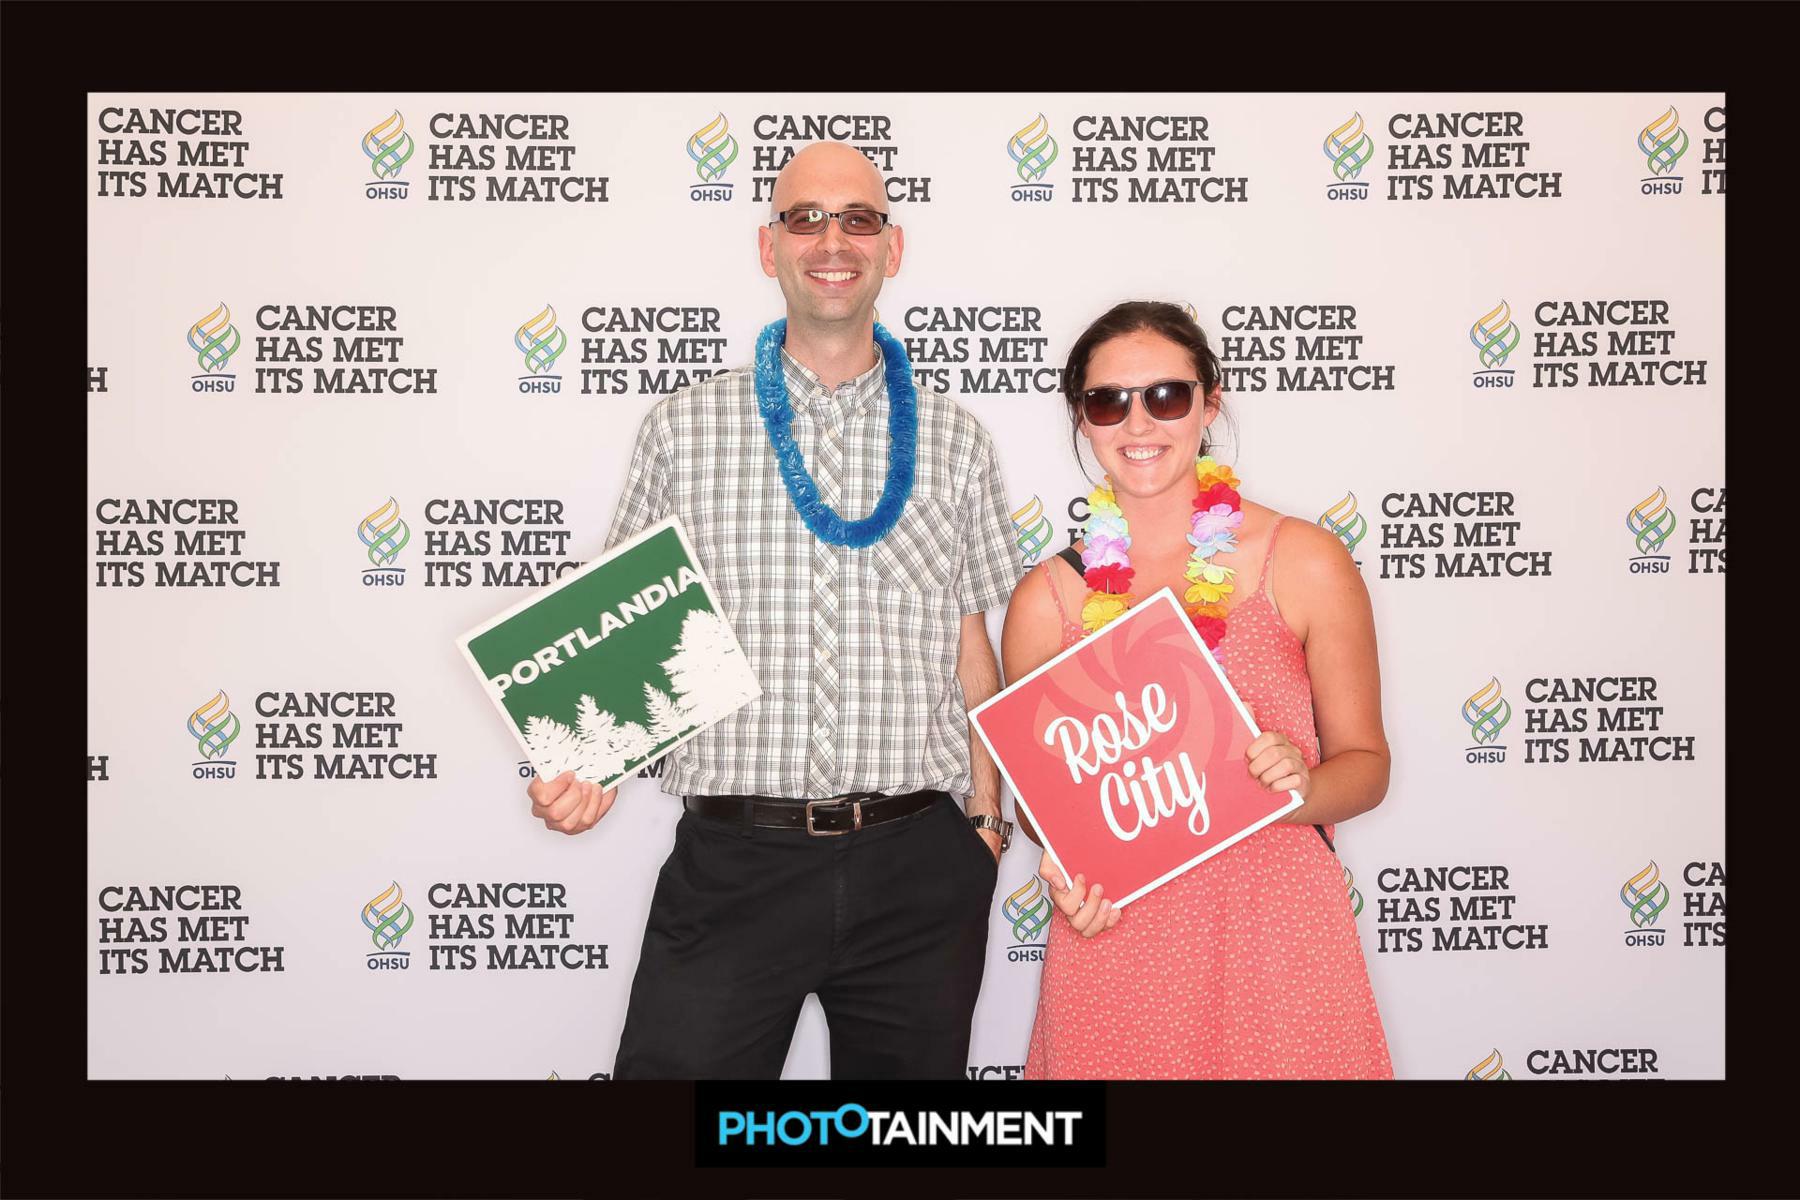 Gard celebrating event to fight cancer